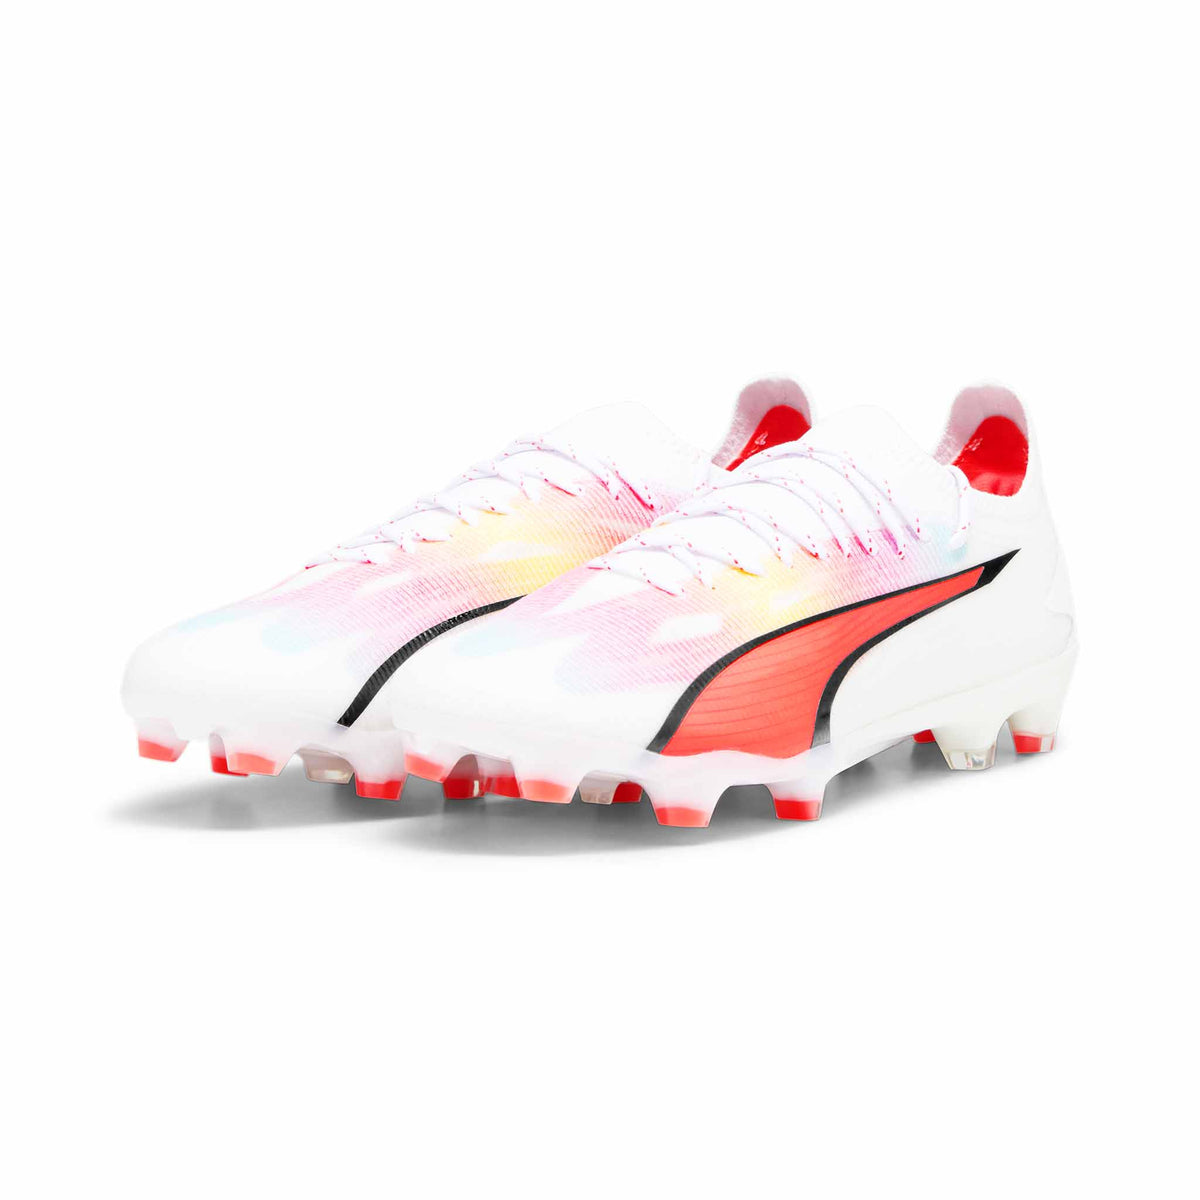 Puma Ultra Ultimate FG/AG chaussures de soccer a crampons - White / Black / Fire Orchid